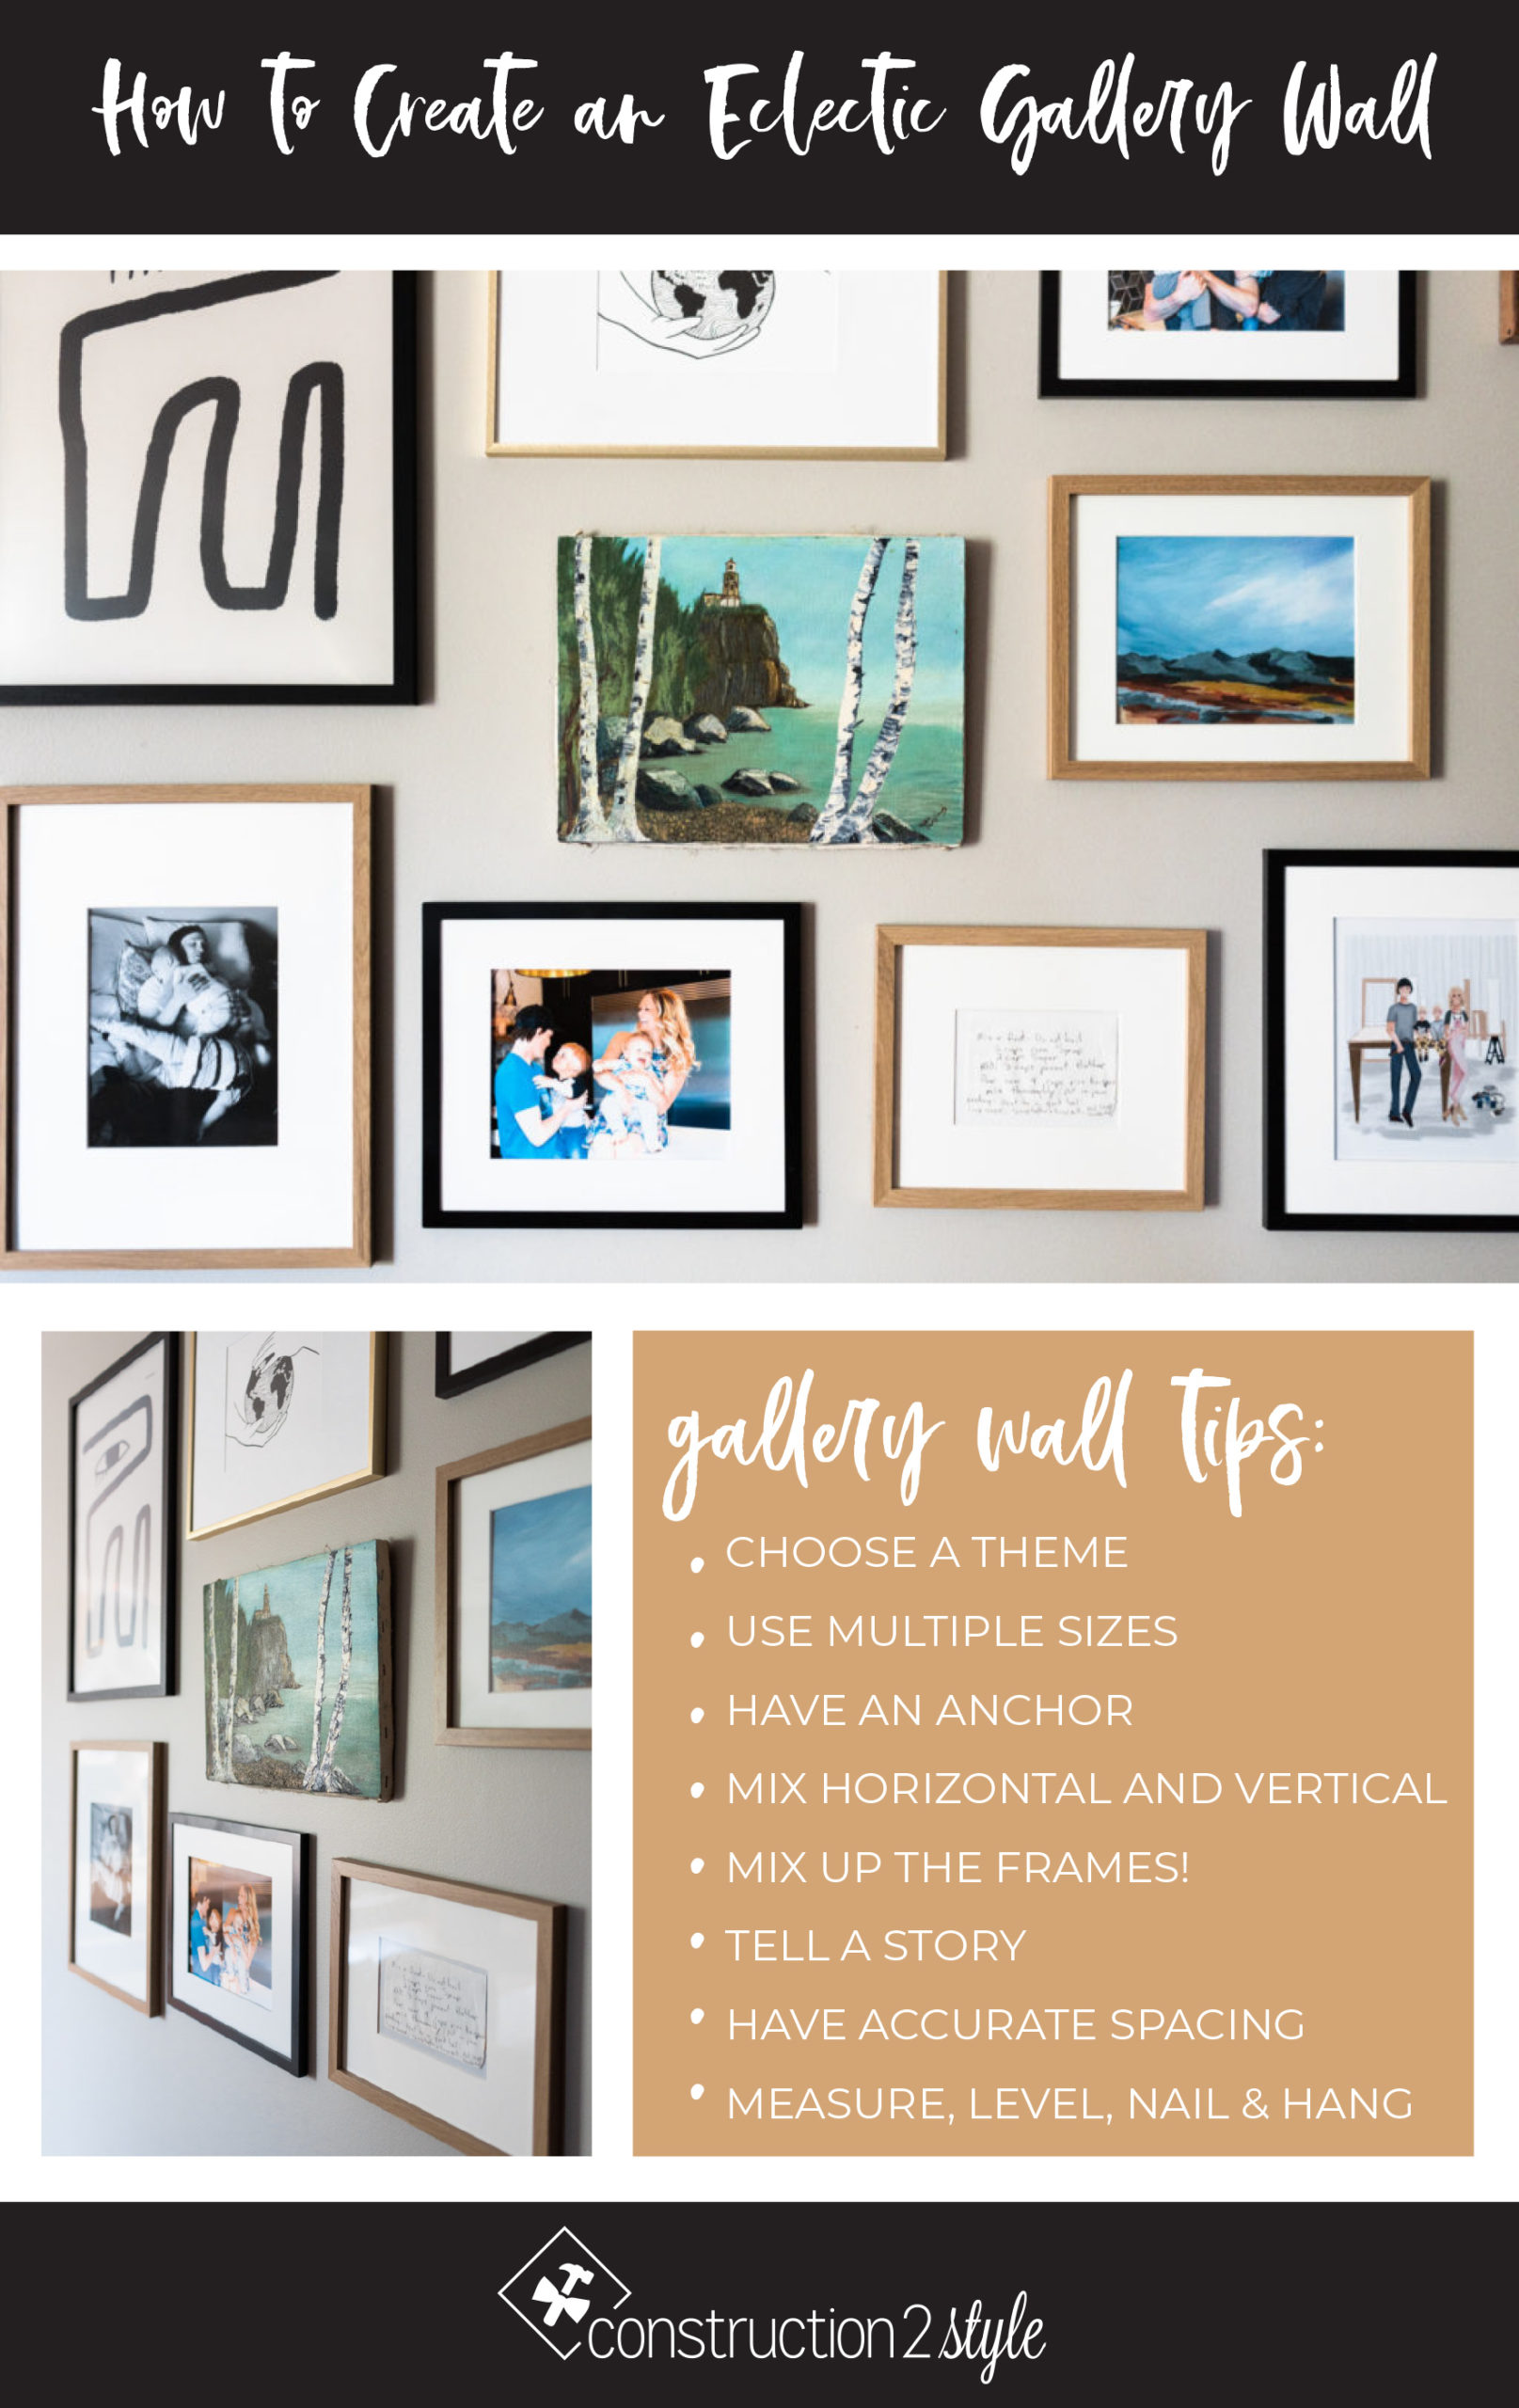 8 Steps to Create an Eclectic Gallery Wall 1